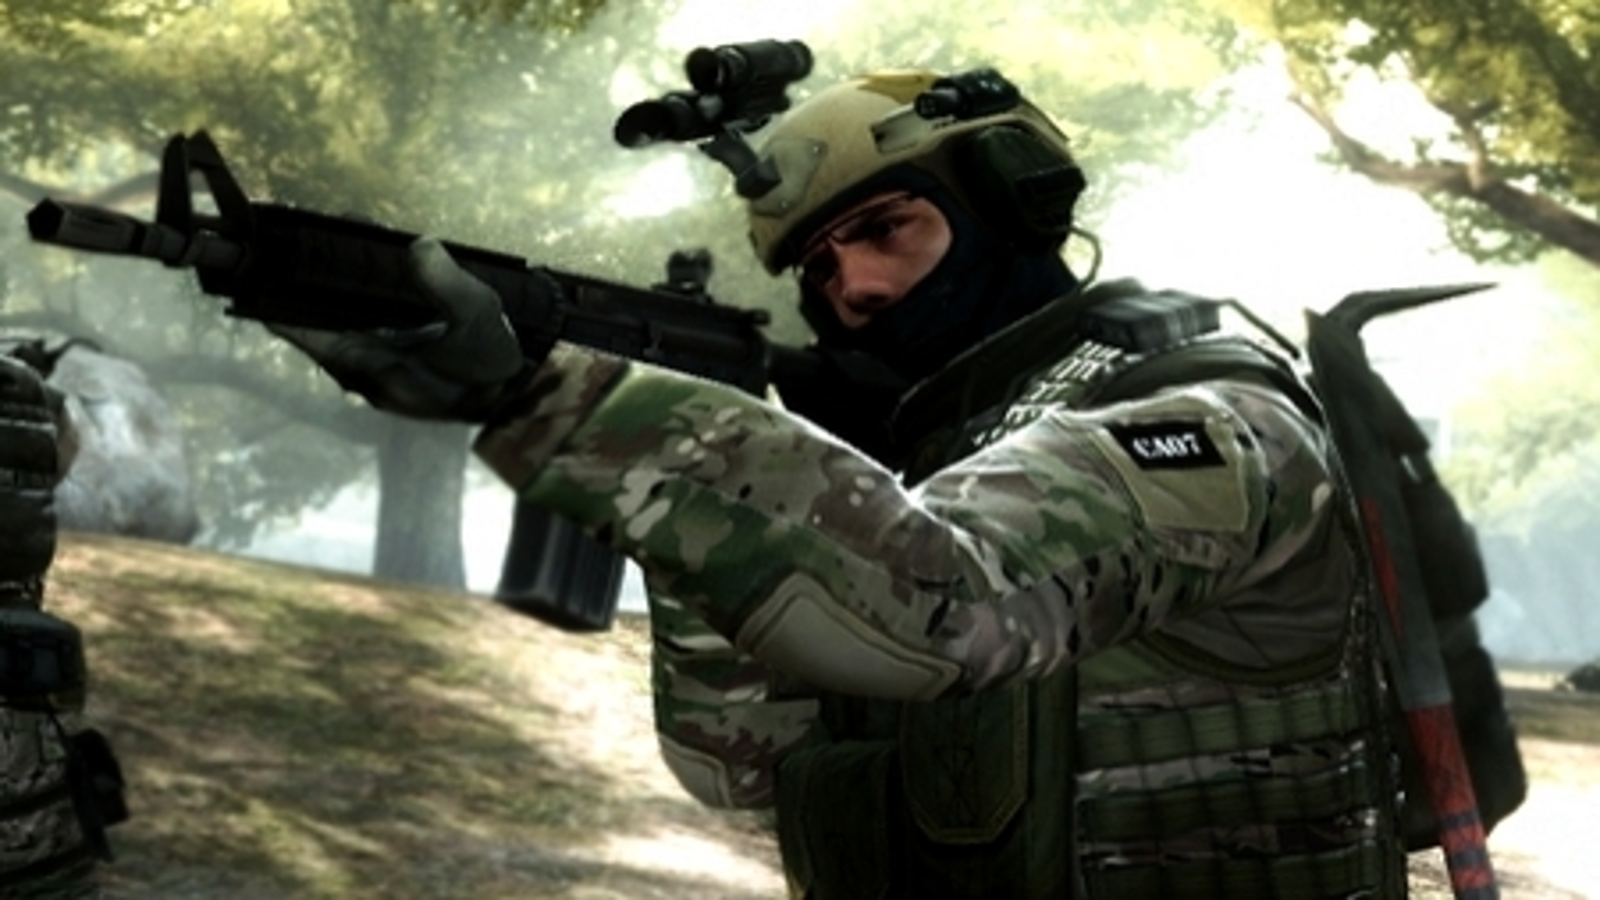 Análisis Counter-Strike: Global Offensive - PC, PS3, Xbox 360